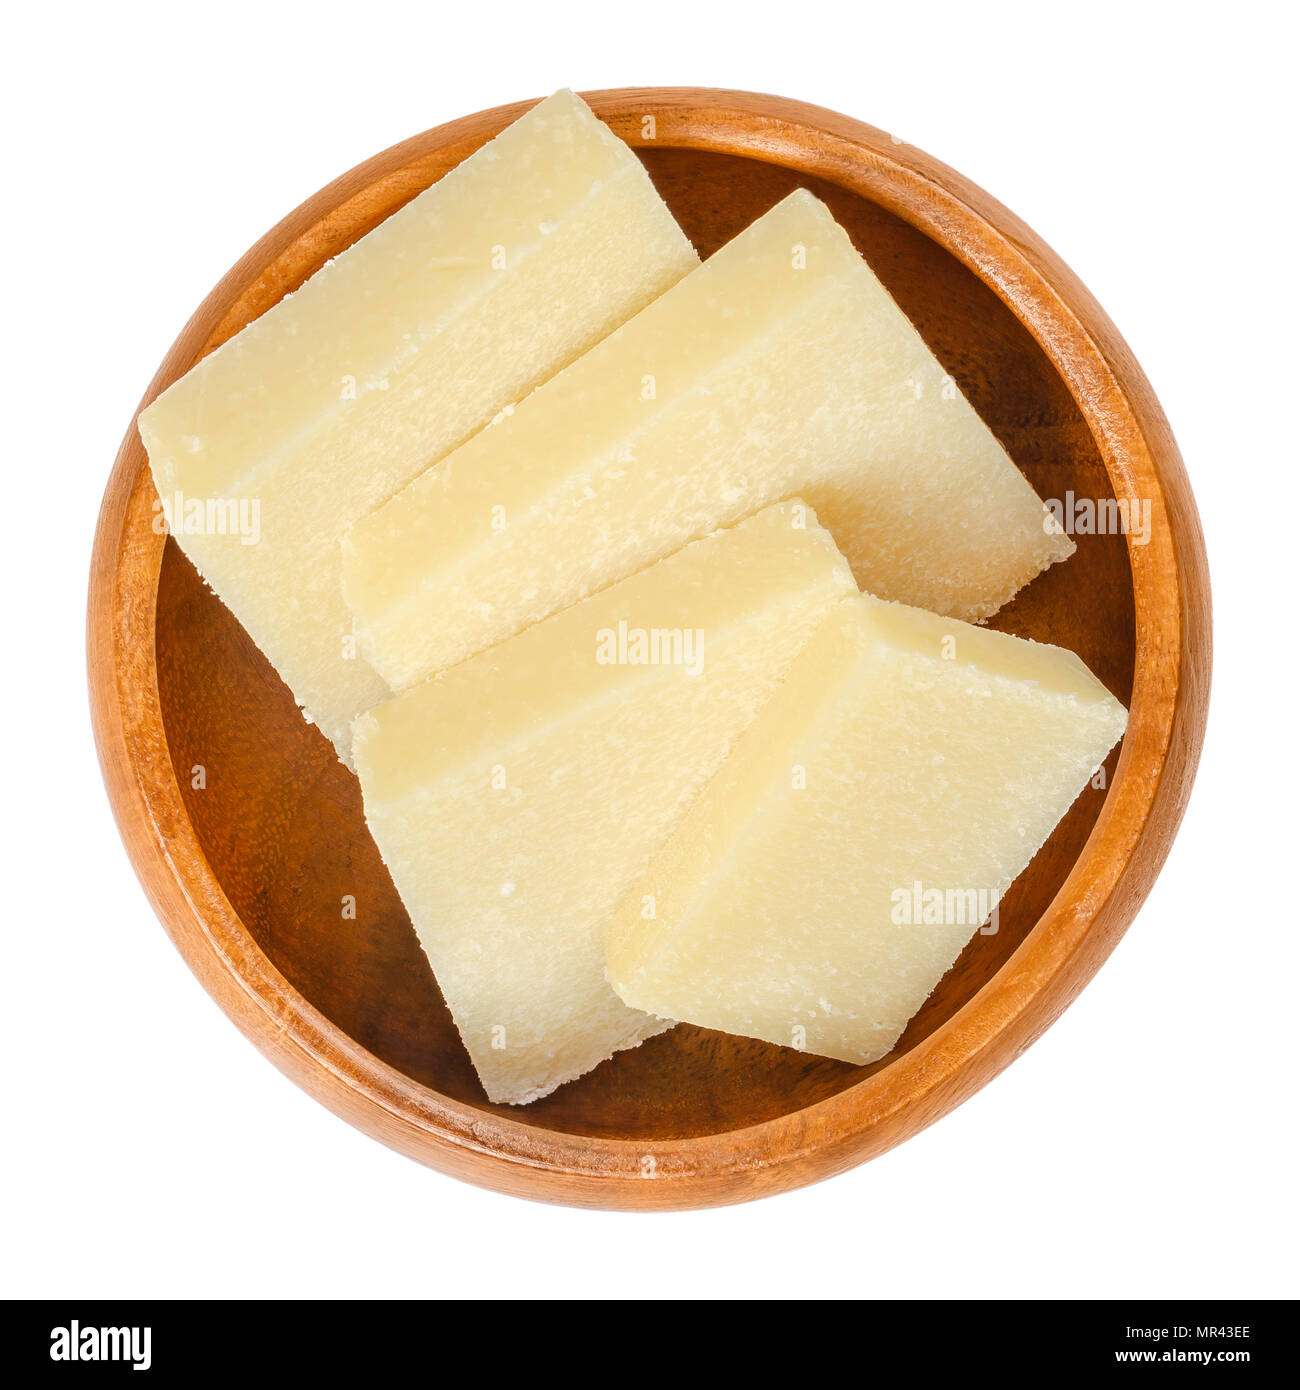 Parmesan cheese slices in wooden bowl. Parmigiano-Reggiano. Italian hard, granular cheese, of slightly yellow color, made of unpasteurized cow milk. Stock Photo